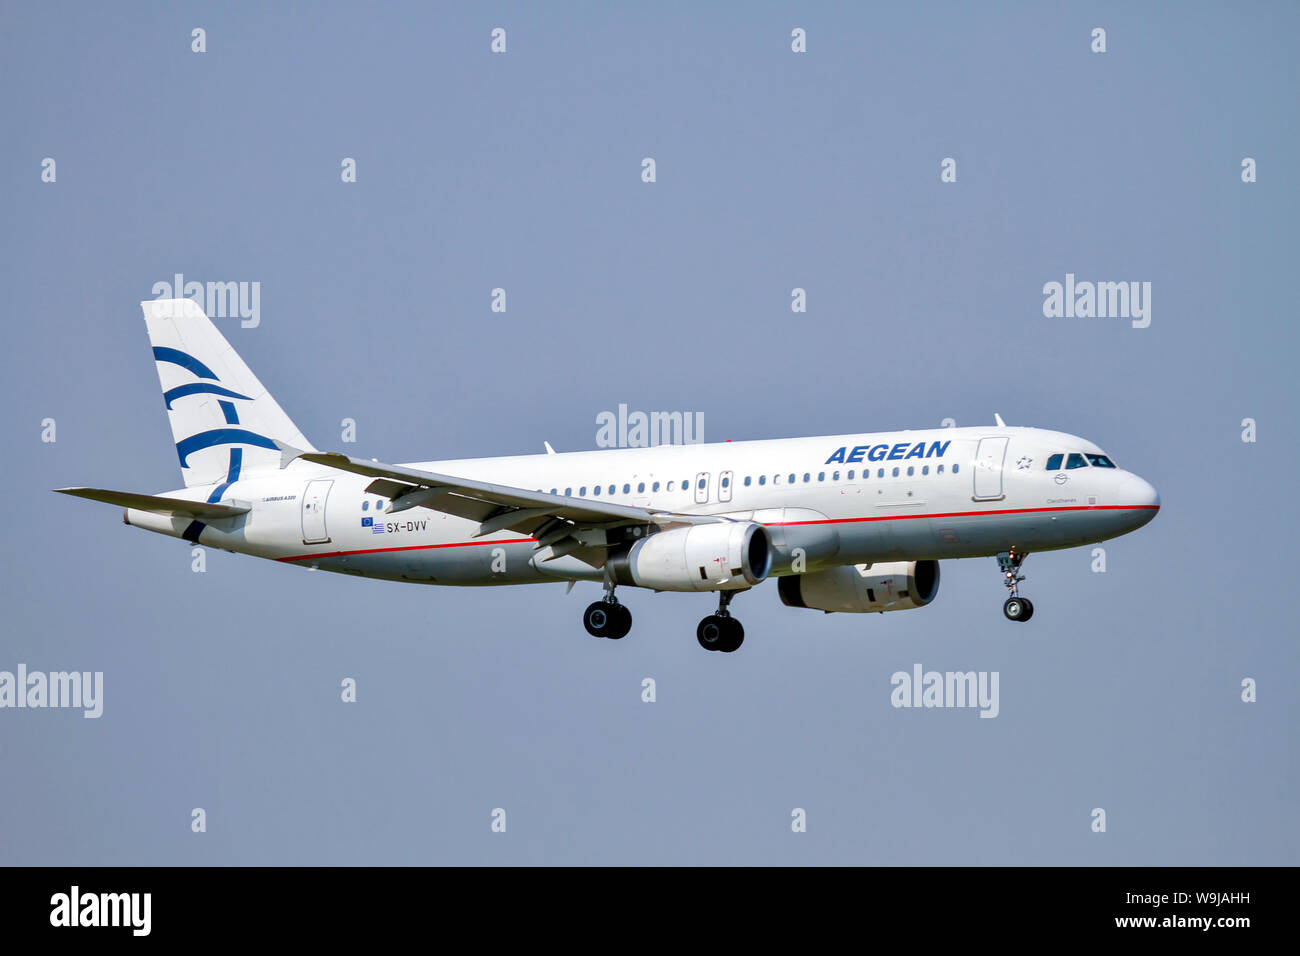 Aegean Airlines Airbus A320-232 SX-DVV comming into land at Malpensa (MXP / LIMC), Milan, Italy Stock Photo